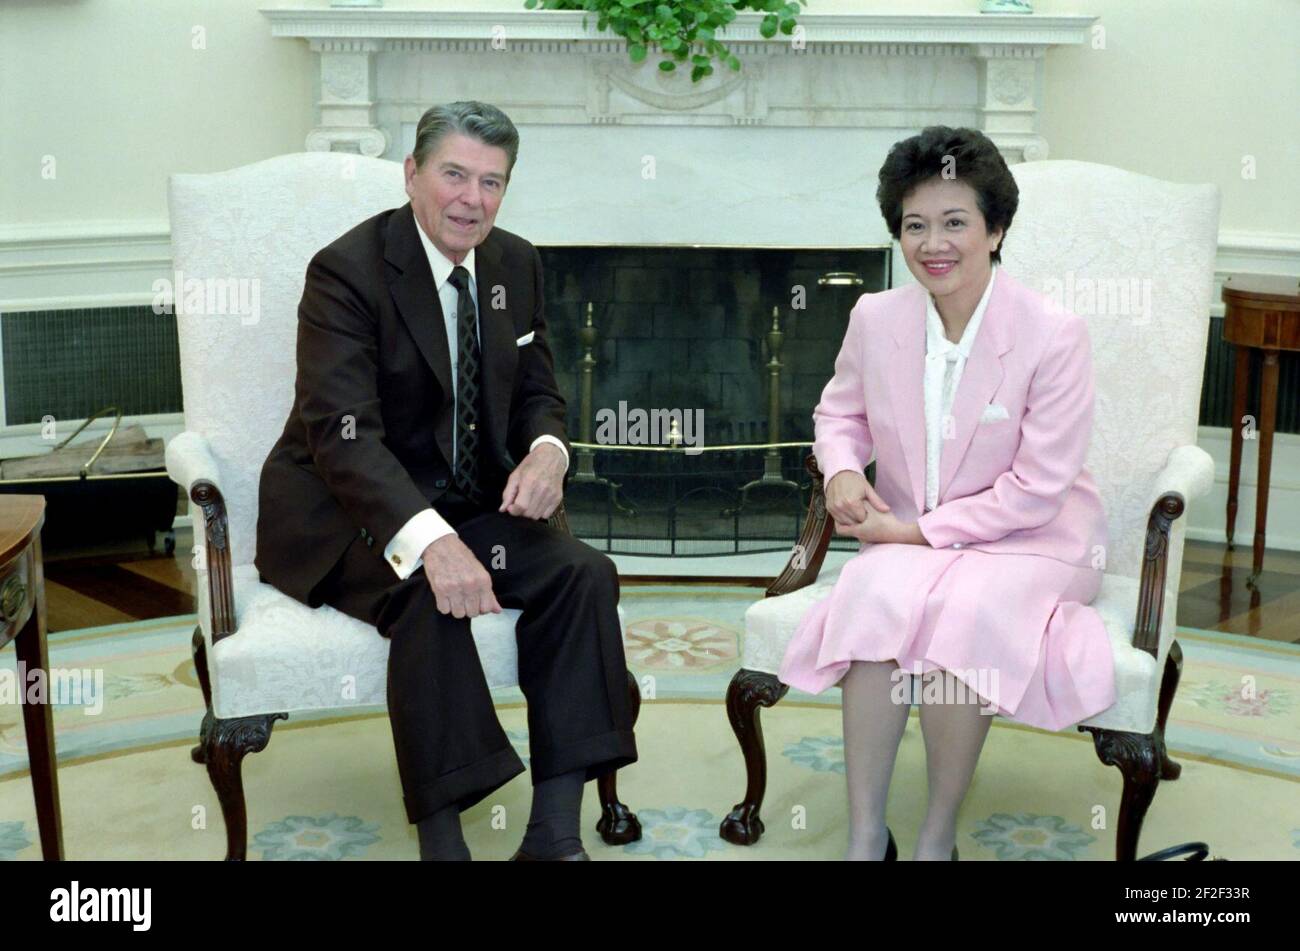 President Ronald Reagan meeting with President Corazon Aquino of the Philippines in the Oval Office. Stock Photo